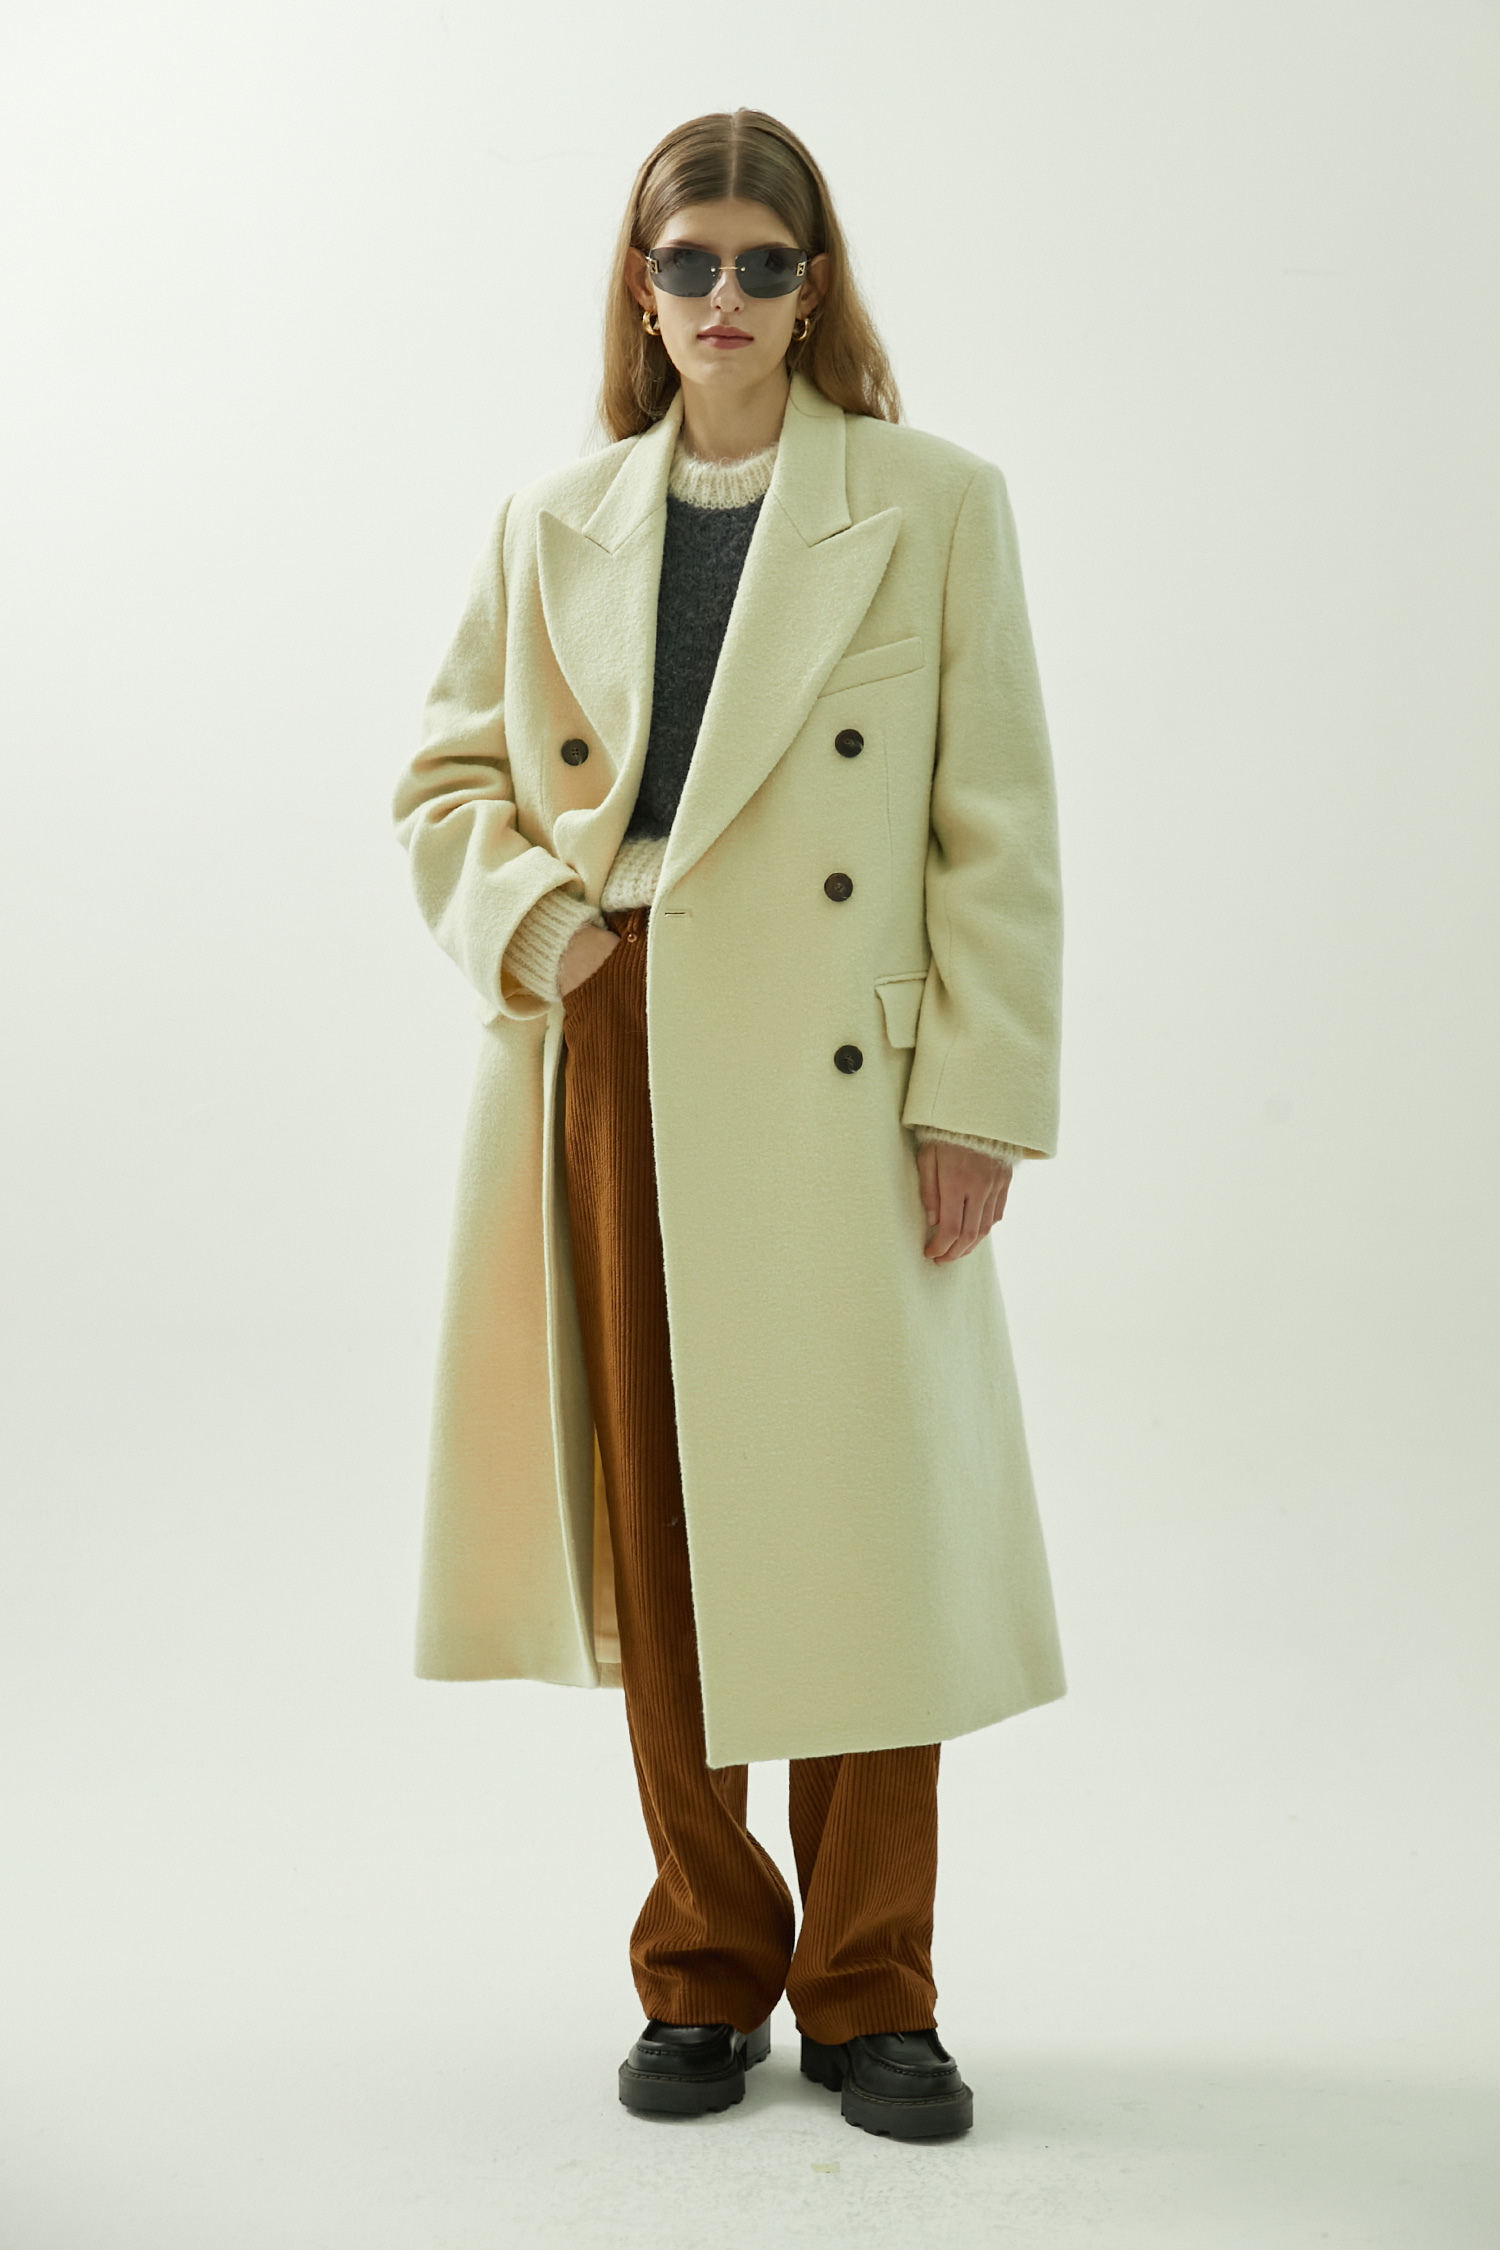 DOUBLE BREASTED TAILORED COAT - YELLOW